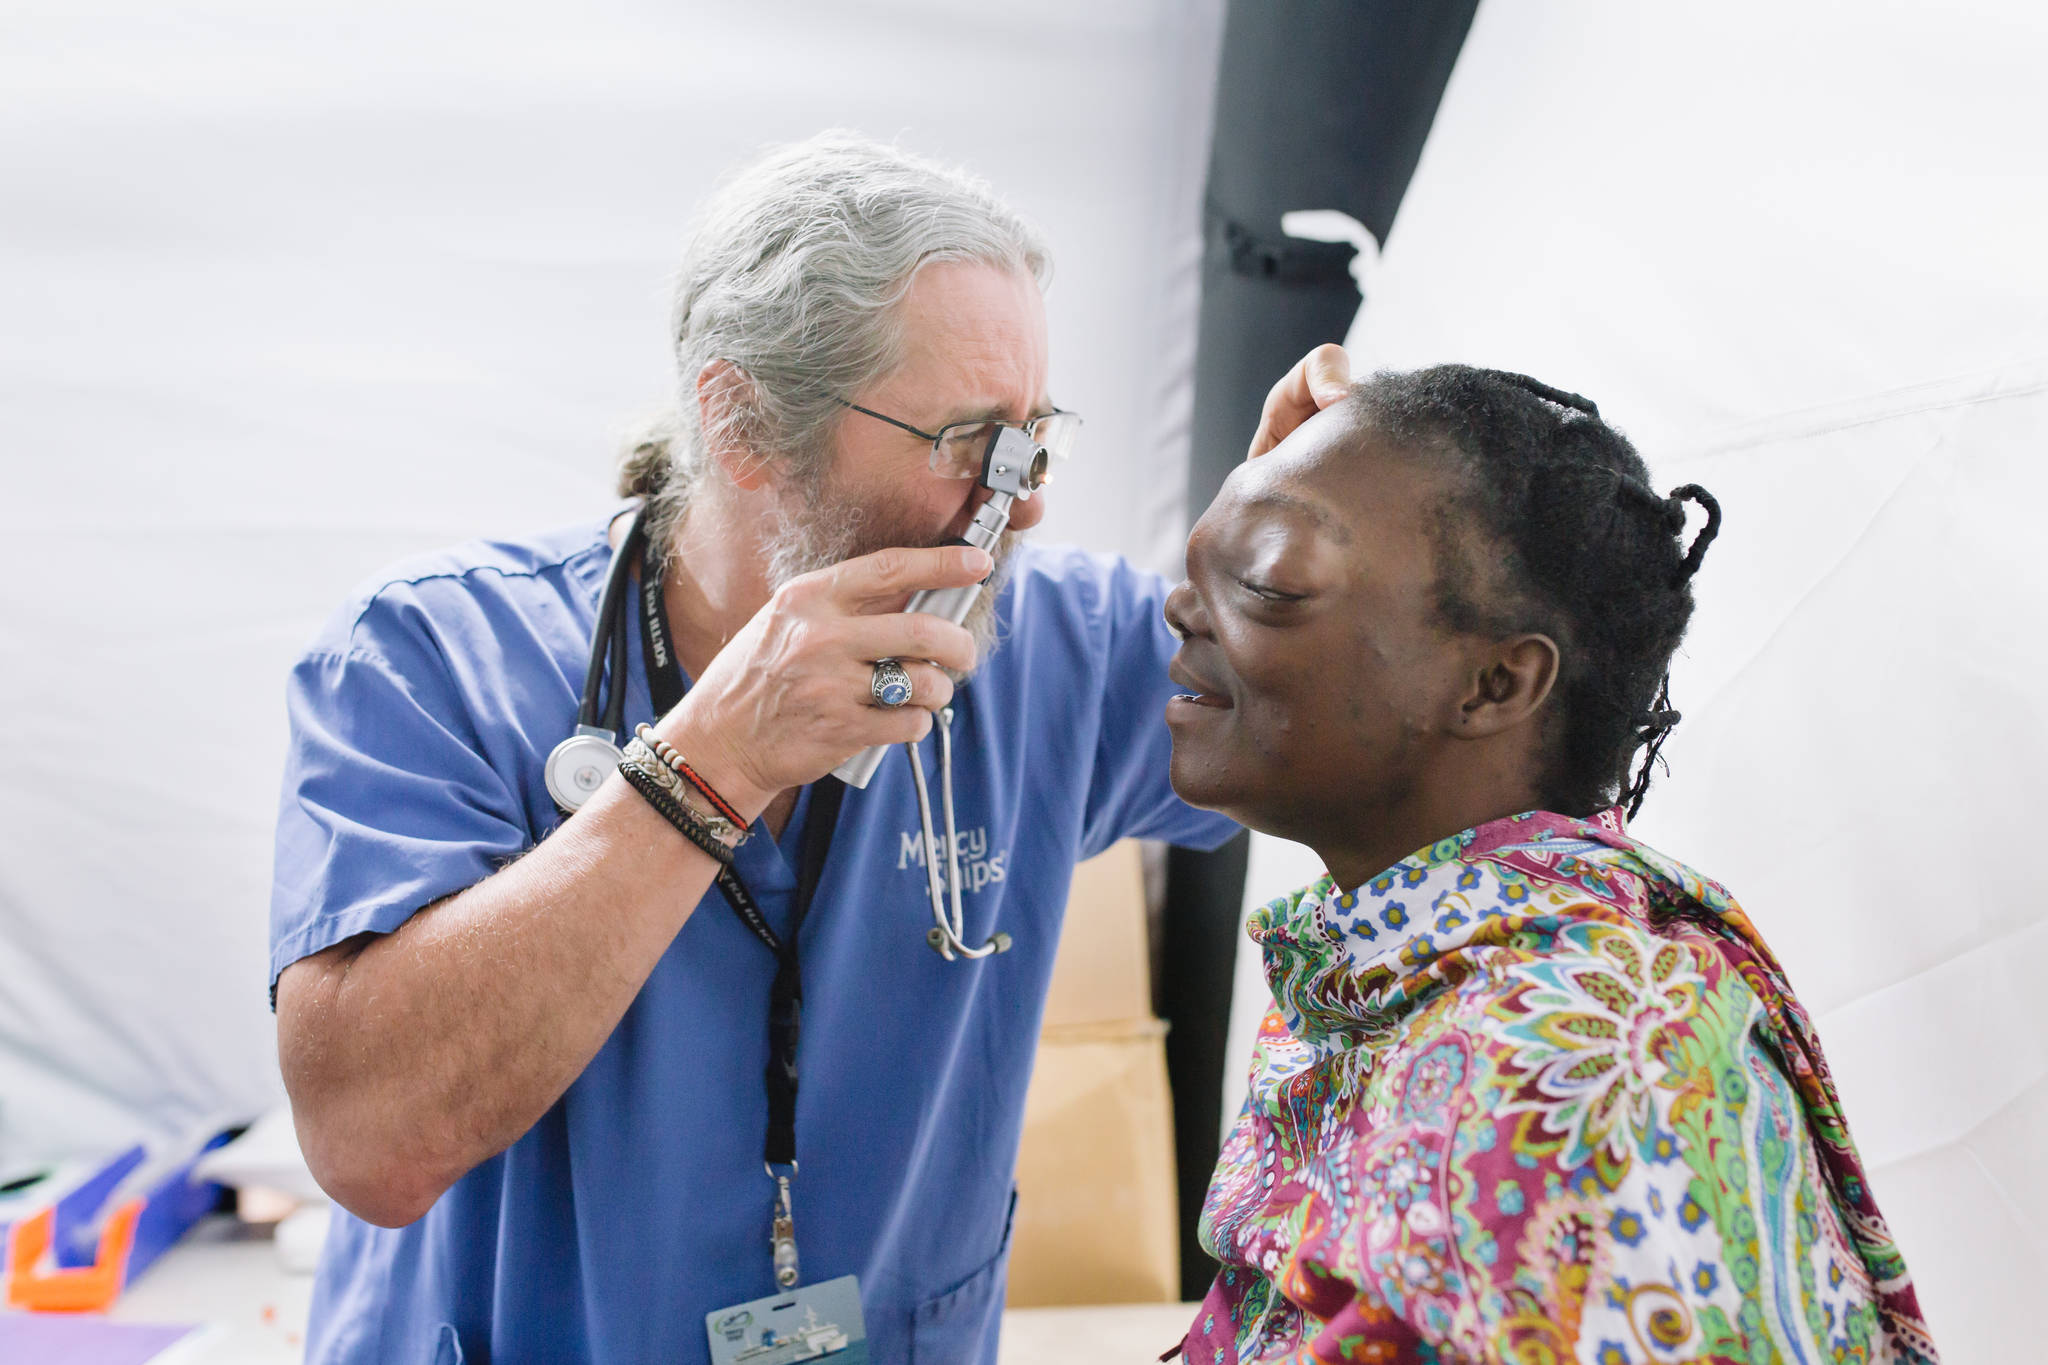 Mercy Ships volunteer Hospital Physician, Dr. Mark Peterson, examines a patient before their admission to the Africa Mercy for surgery. (Shawn Thompson | Mercy Ships)